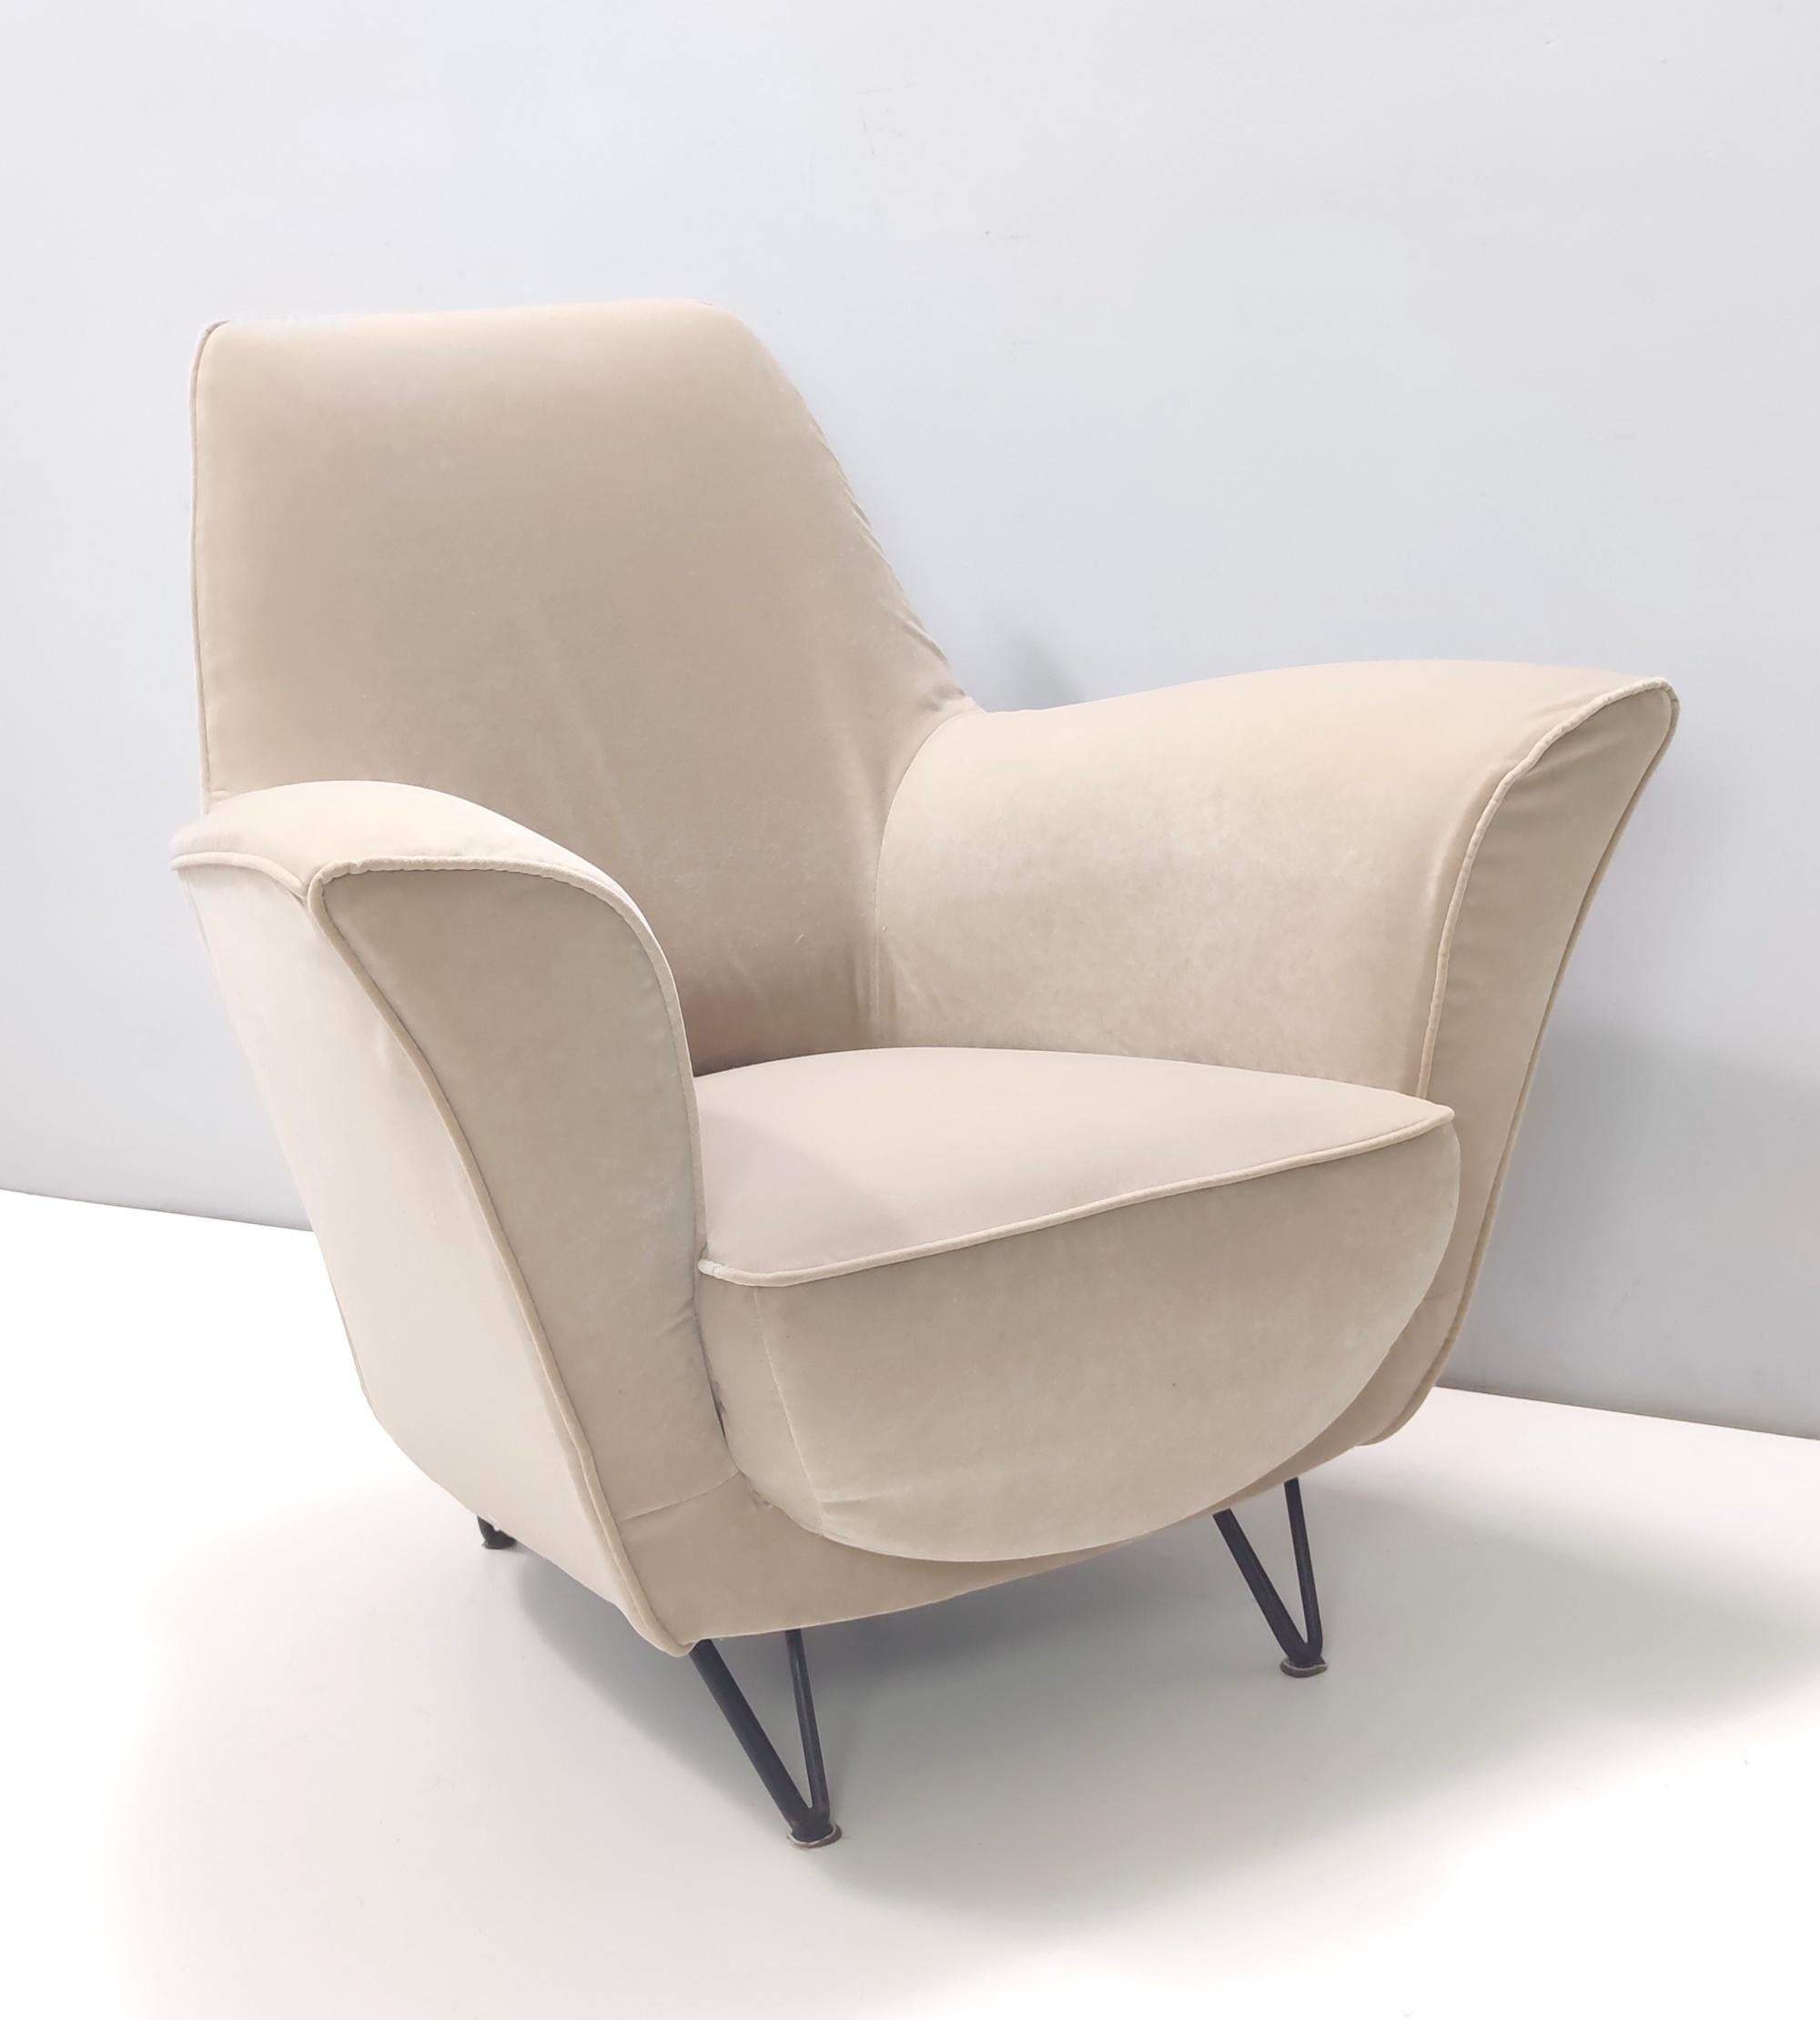 Mid-20th Century Vintage Italian Ivory-Colored Fabric Armchair by Ico Parisi, Italy For Sale